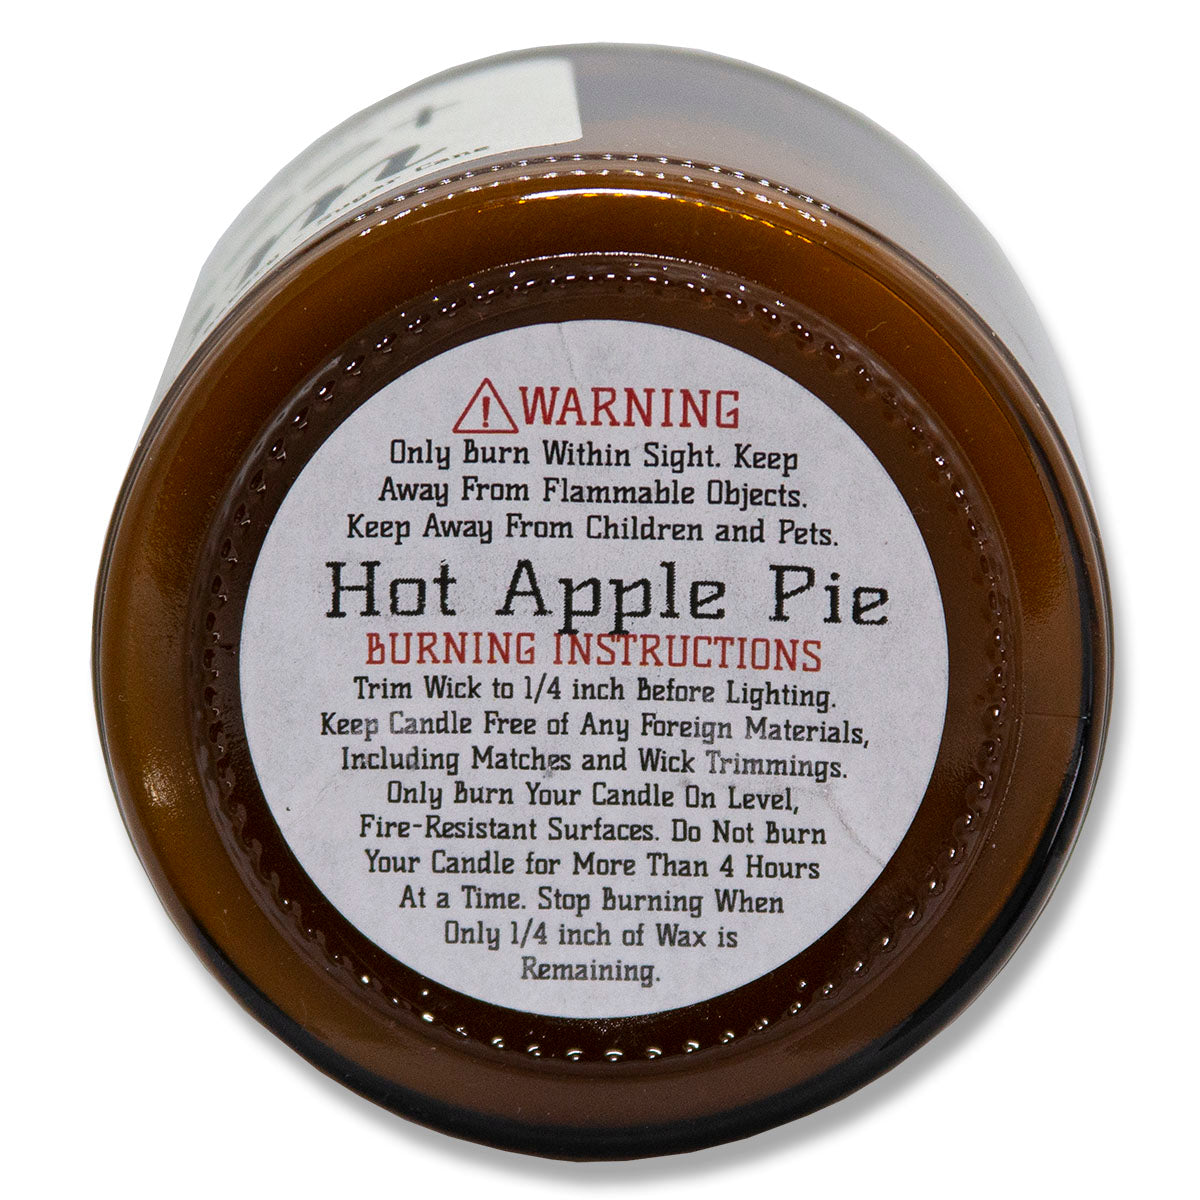 Hot Apple Pie, Lone Star Candles & More's Premium Hand Poured Strongly Scented Soy Wax Gift Candle, Warm Sweet Baked Apples, and Flaky Pie Crust, USA Made in Texas, Amber Glass Jar 9oz Happy Birthday